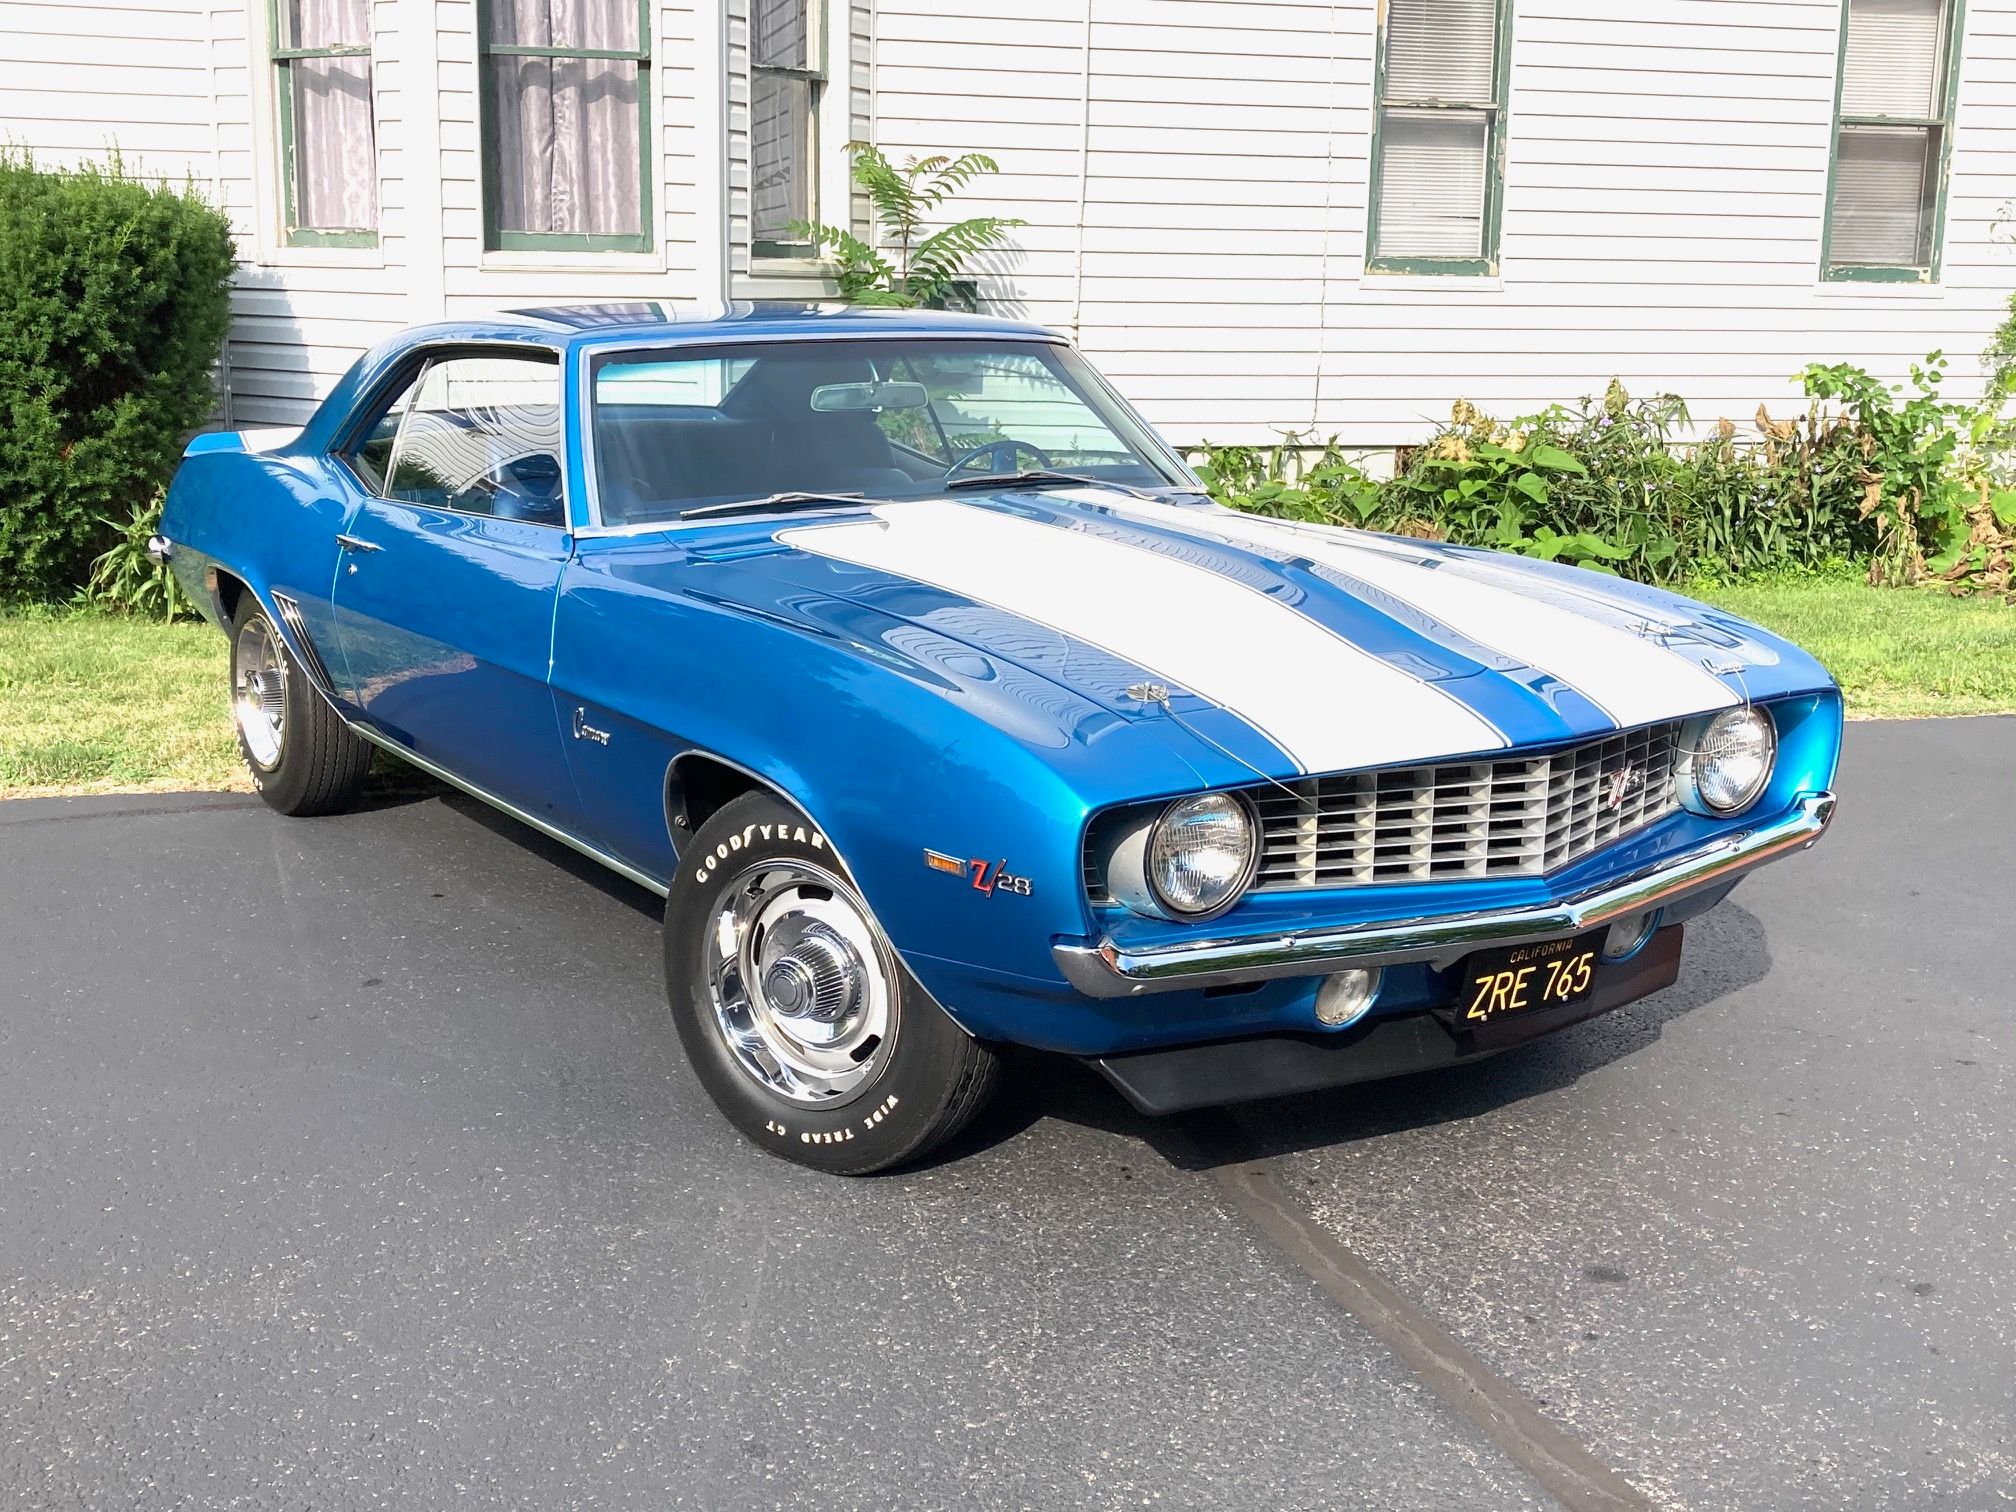 Blue with white stripes 1967-1969 Chevrolet Camaro (First Generation)